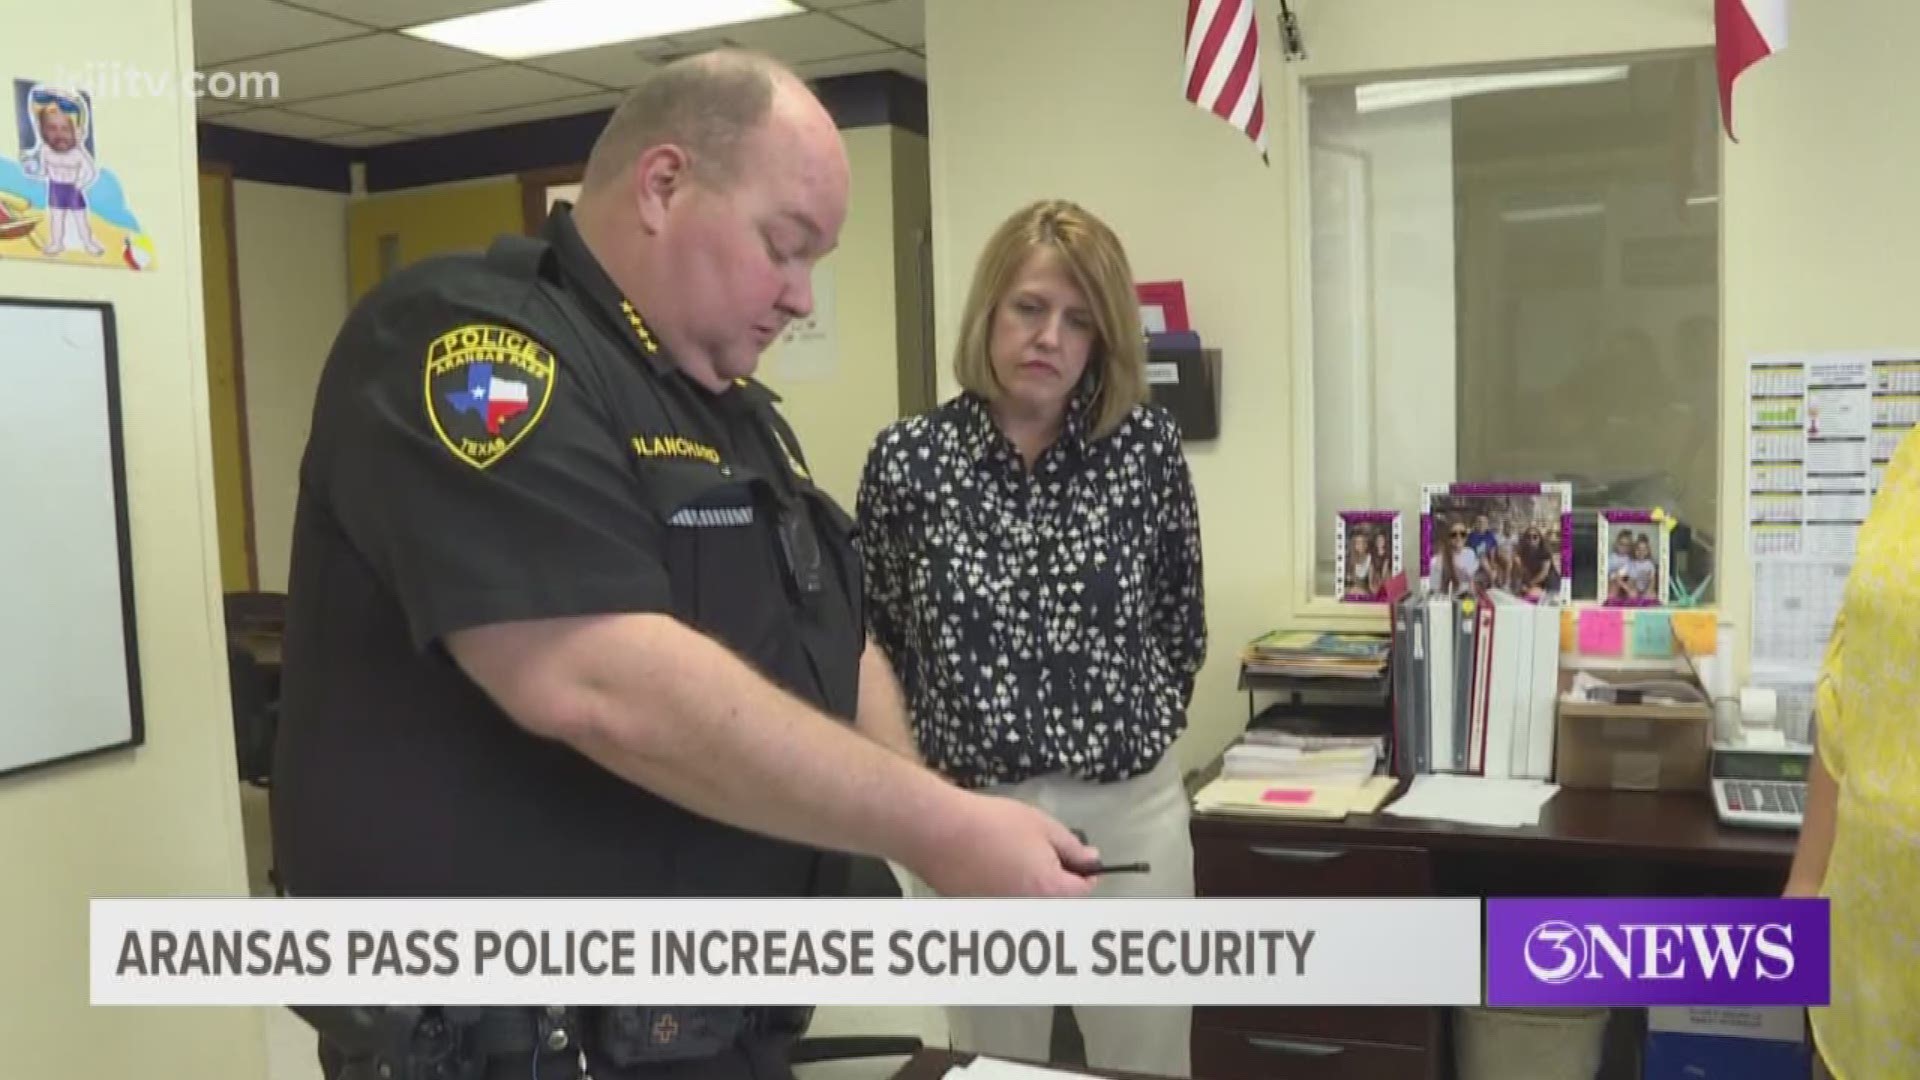 After the tragic shooting at a STEM school in Colorado, Aransas Pass Police Chief Eric Blanchard was driven to secure APISD schools even more.